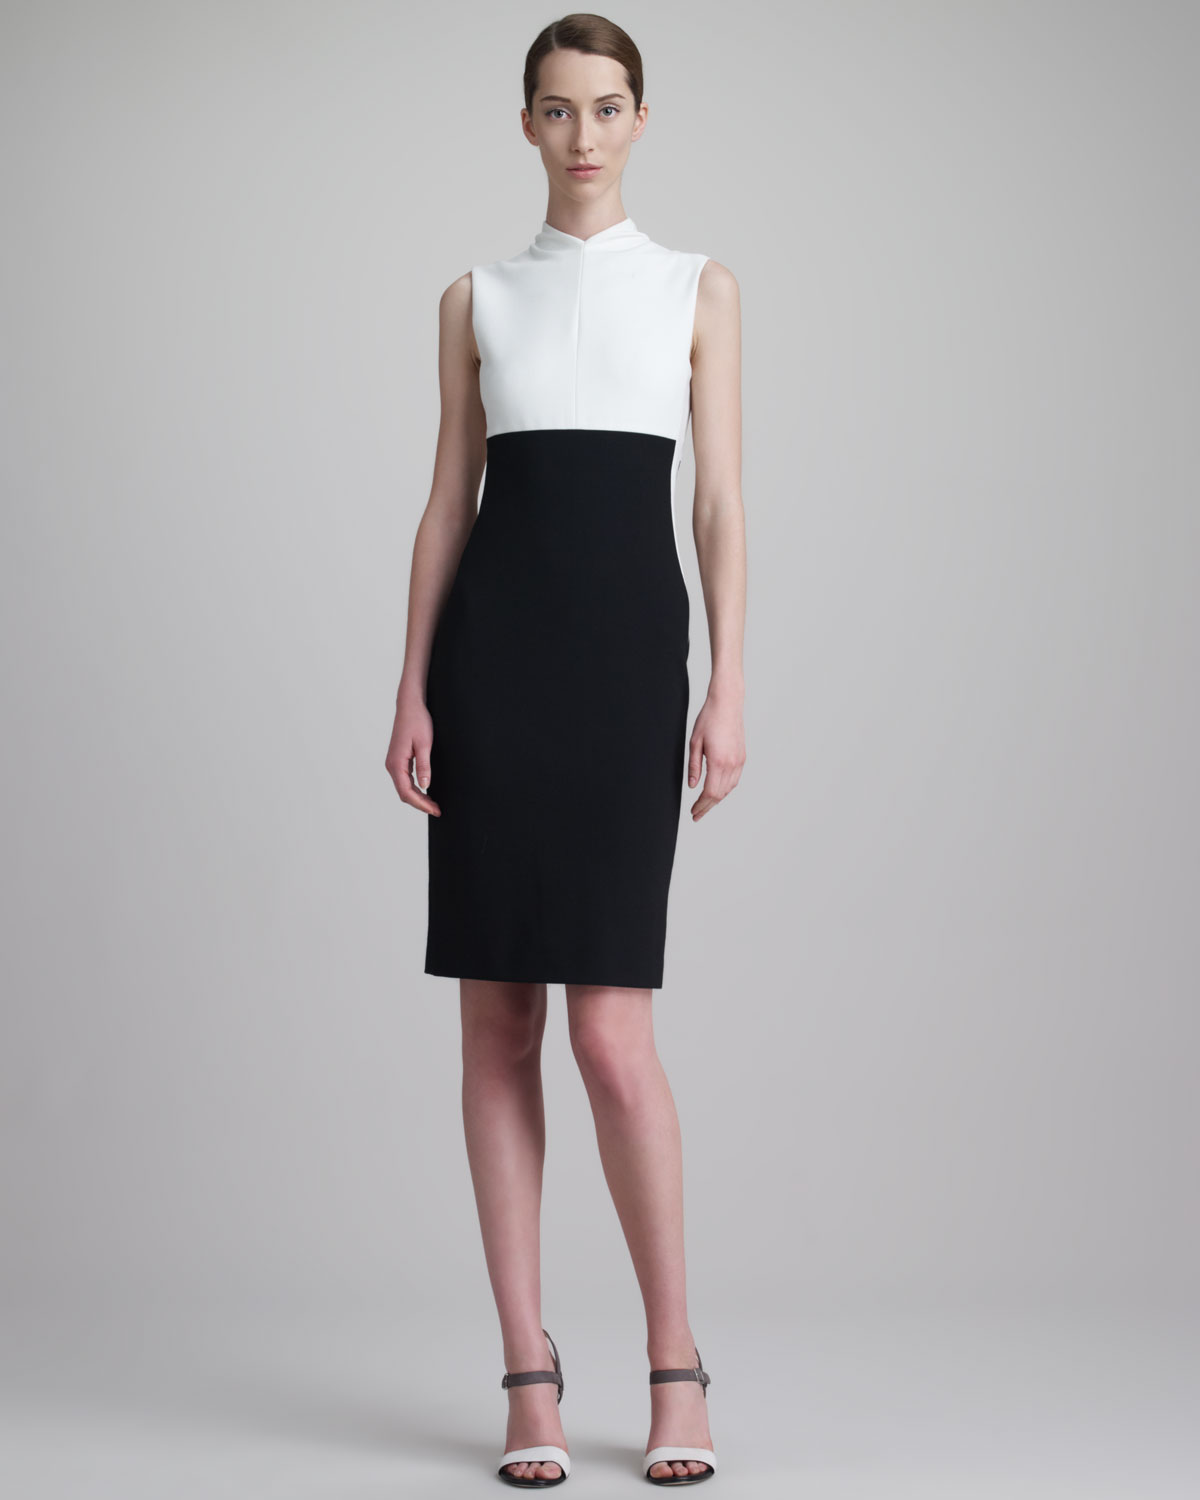 Lyst - Narciso rodriguez Sleeveless Stretch Pique Dress Creamblack in Black